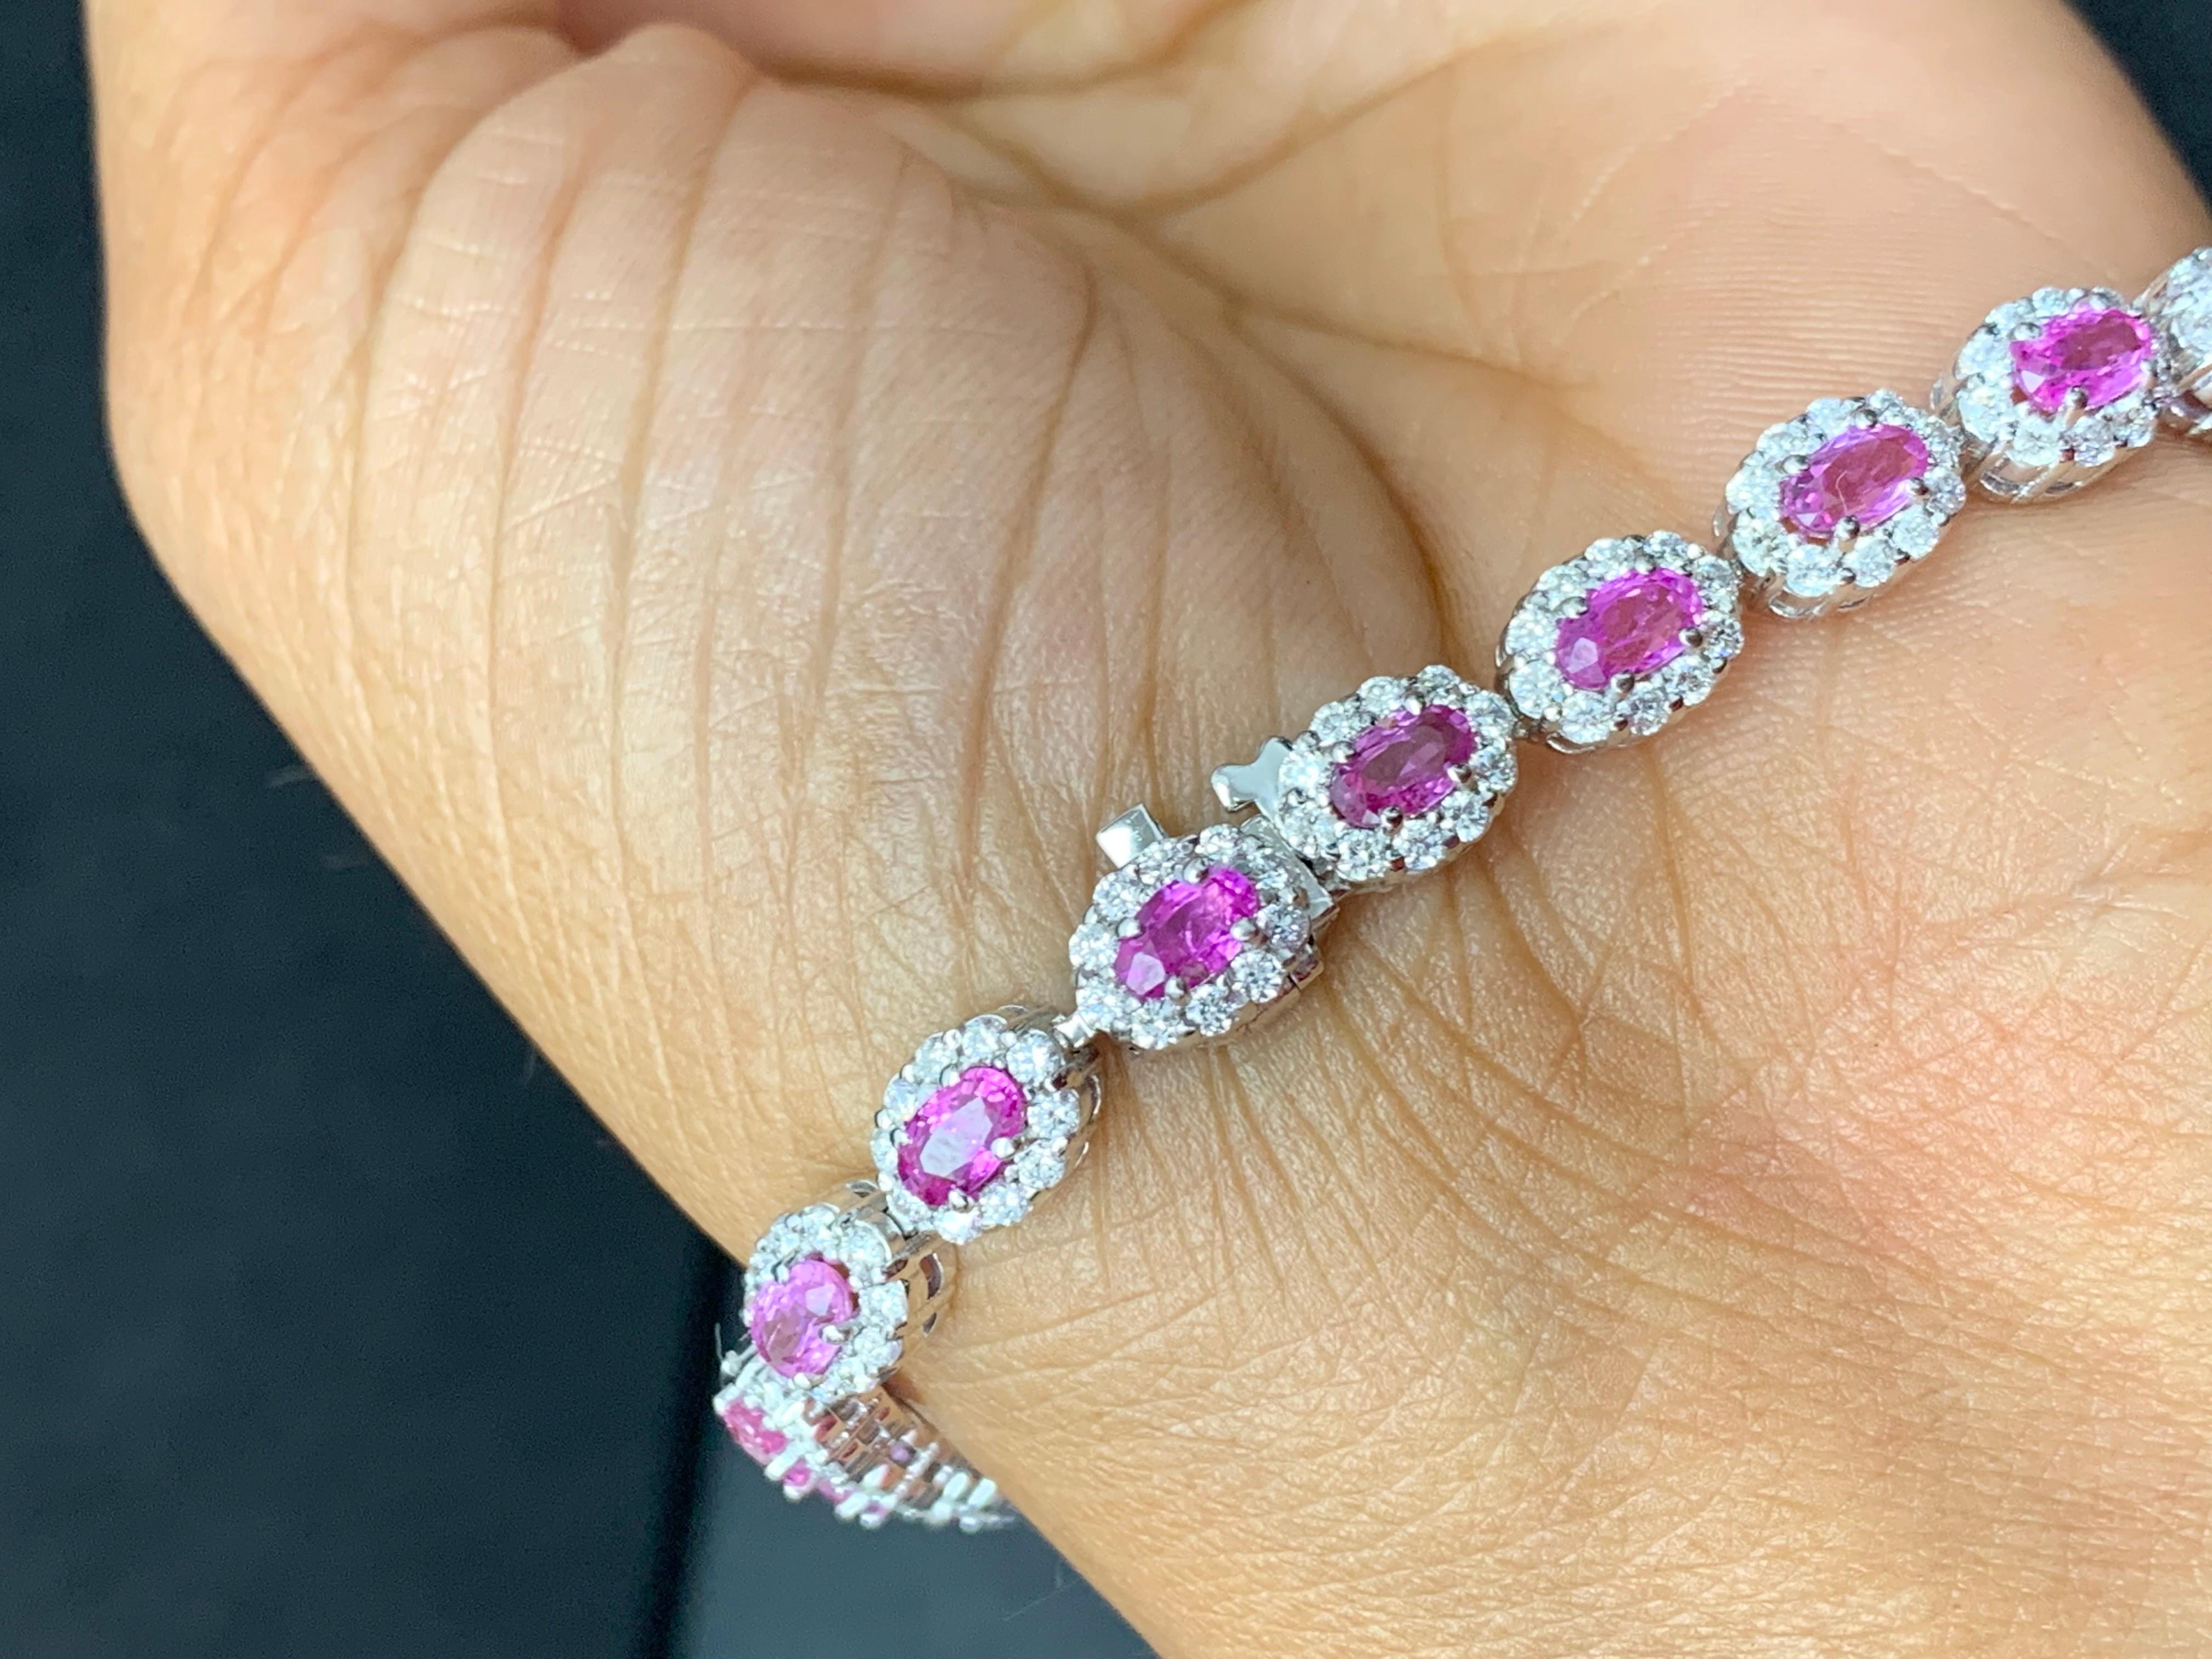 7.21 Carat Oval Cut Pink Sapphire and Diamond Halo Bracelet in 14K White Gold For Sale 4